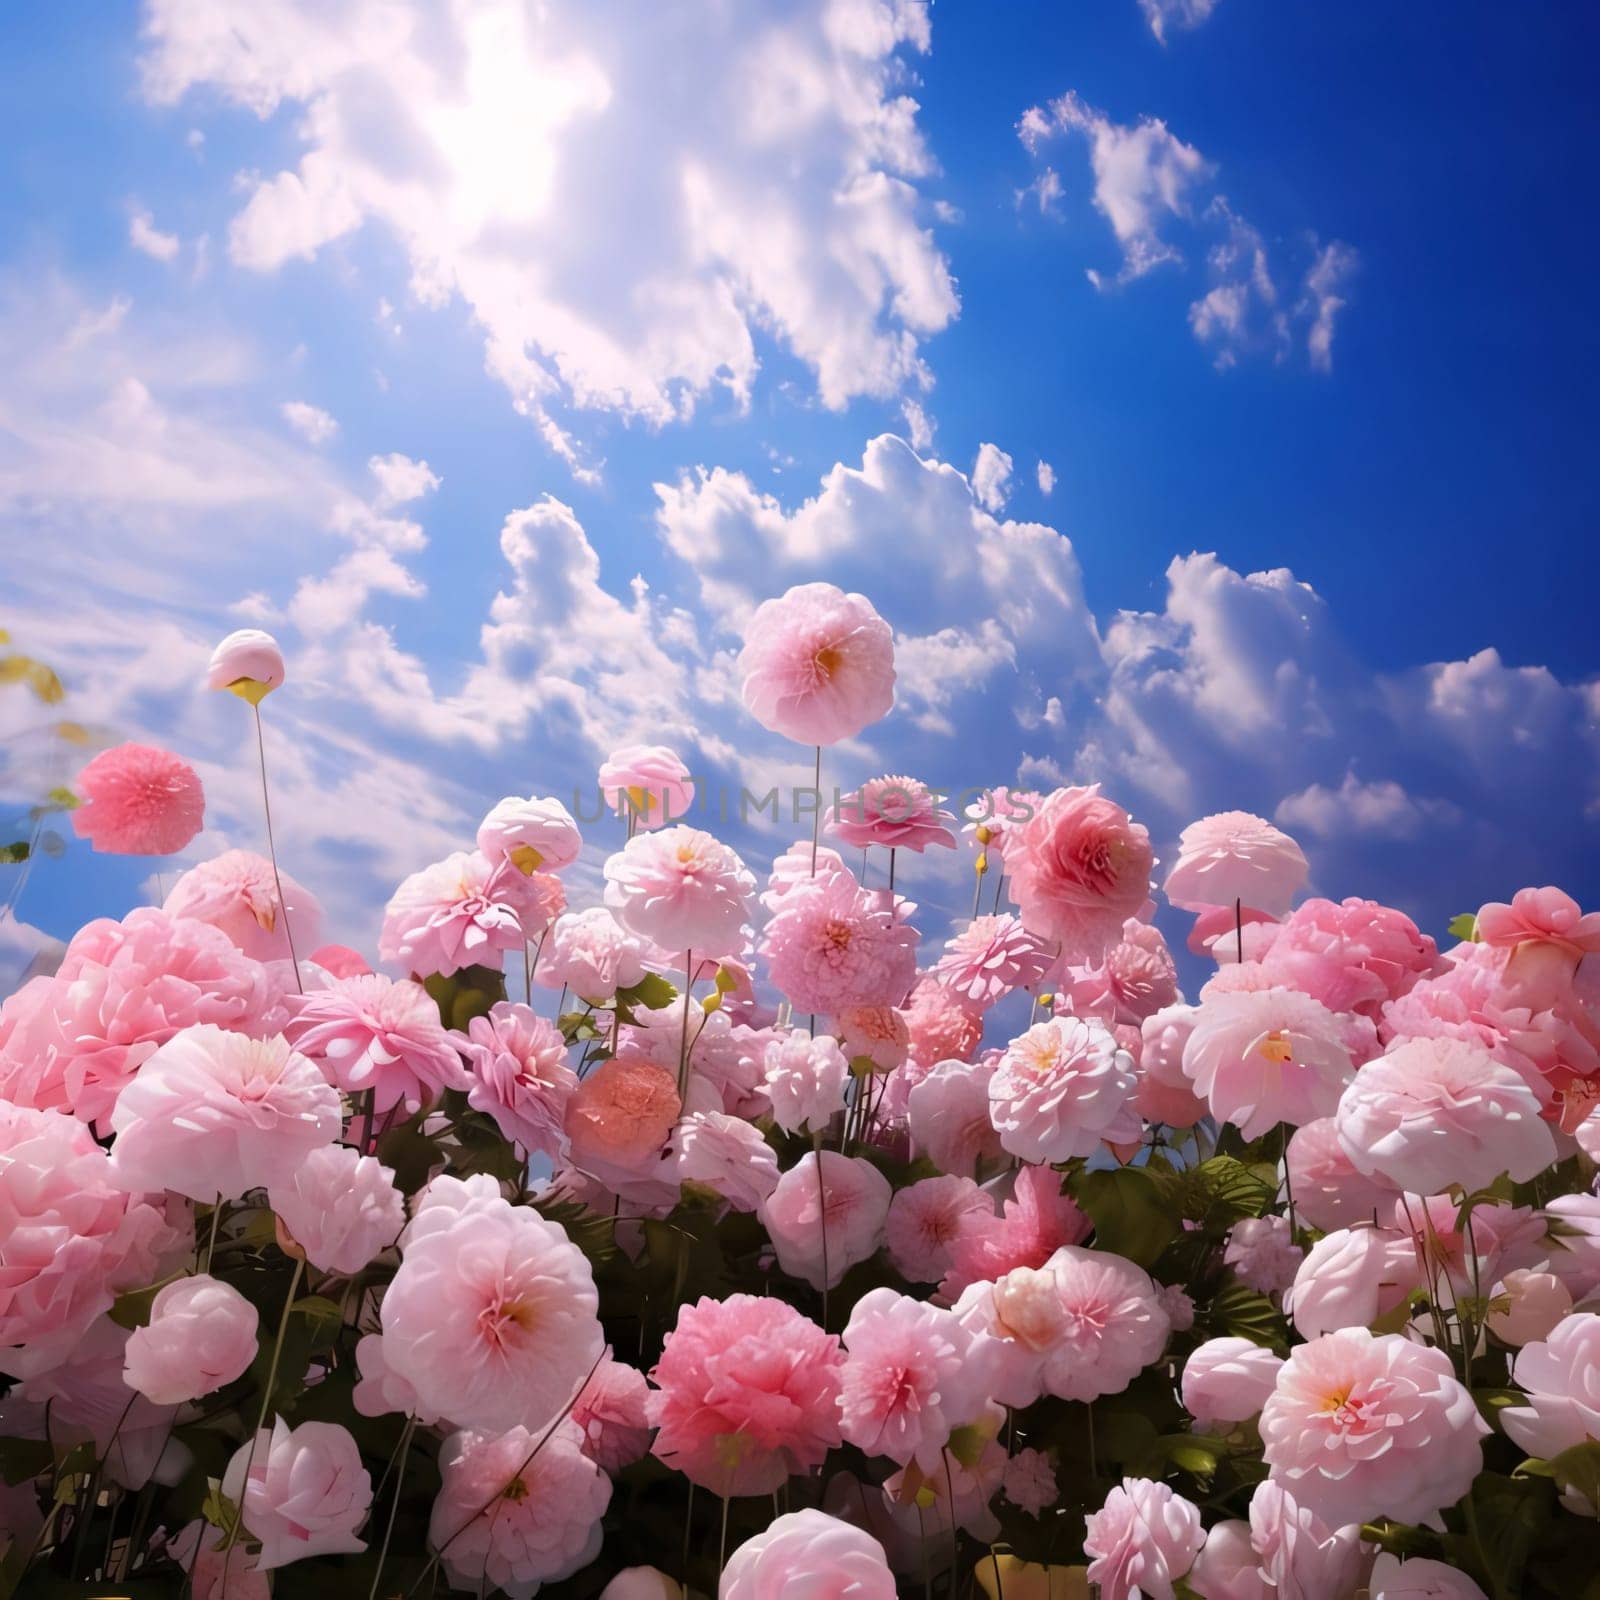 Pink flowers growing in the field. In the back the sky, clouds. Flowering flowers, a symbol of spring, new life. by ThemesS